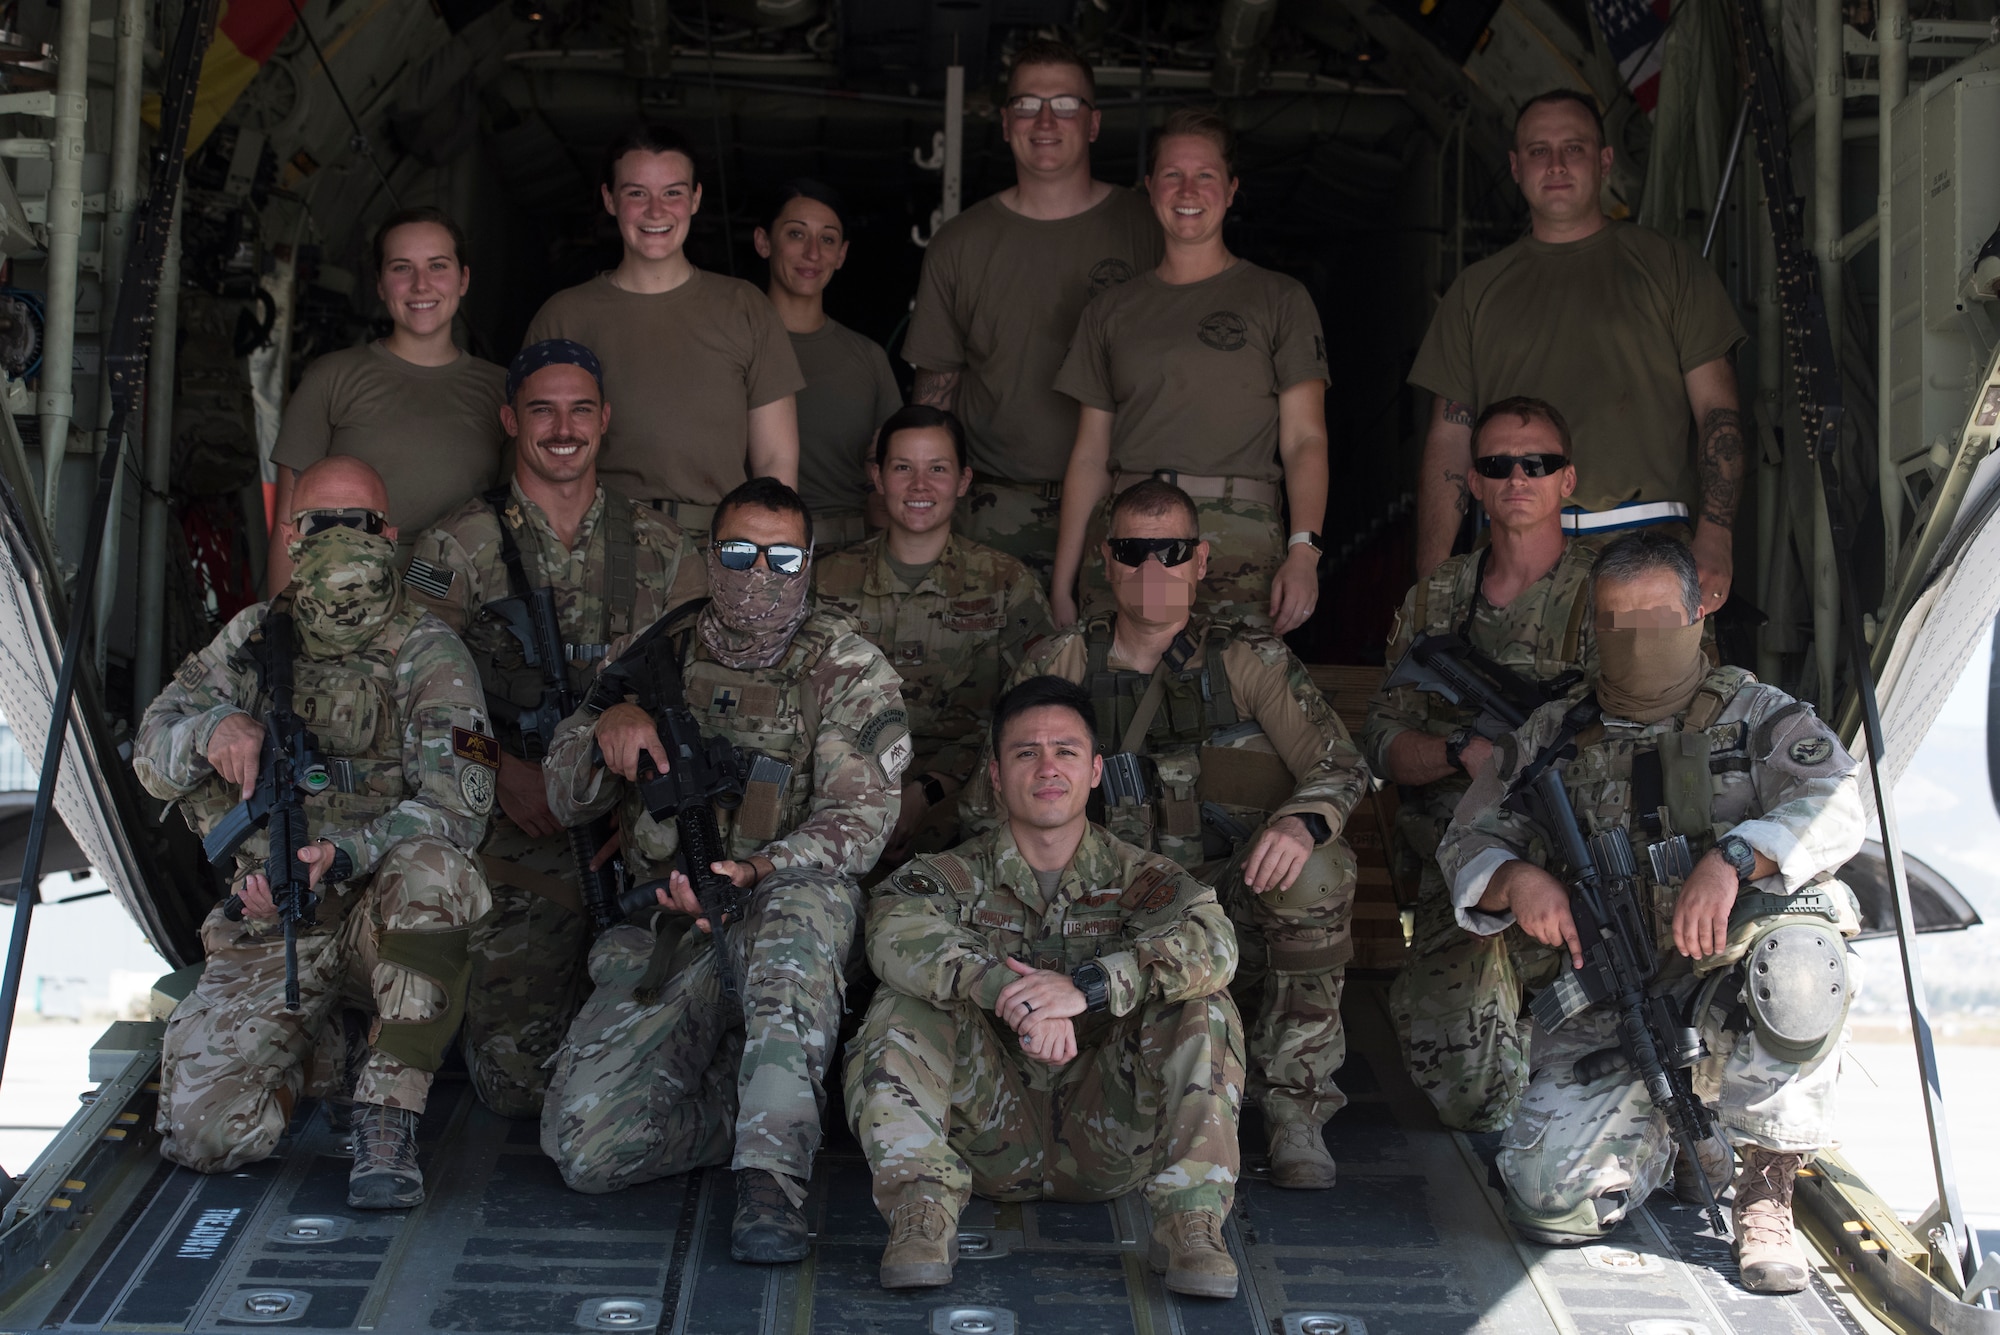 A group of Airmen and Hellenic forces members pose for a photo.